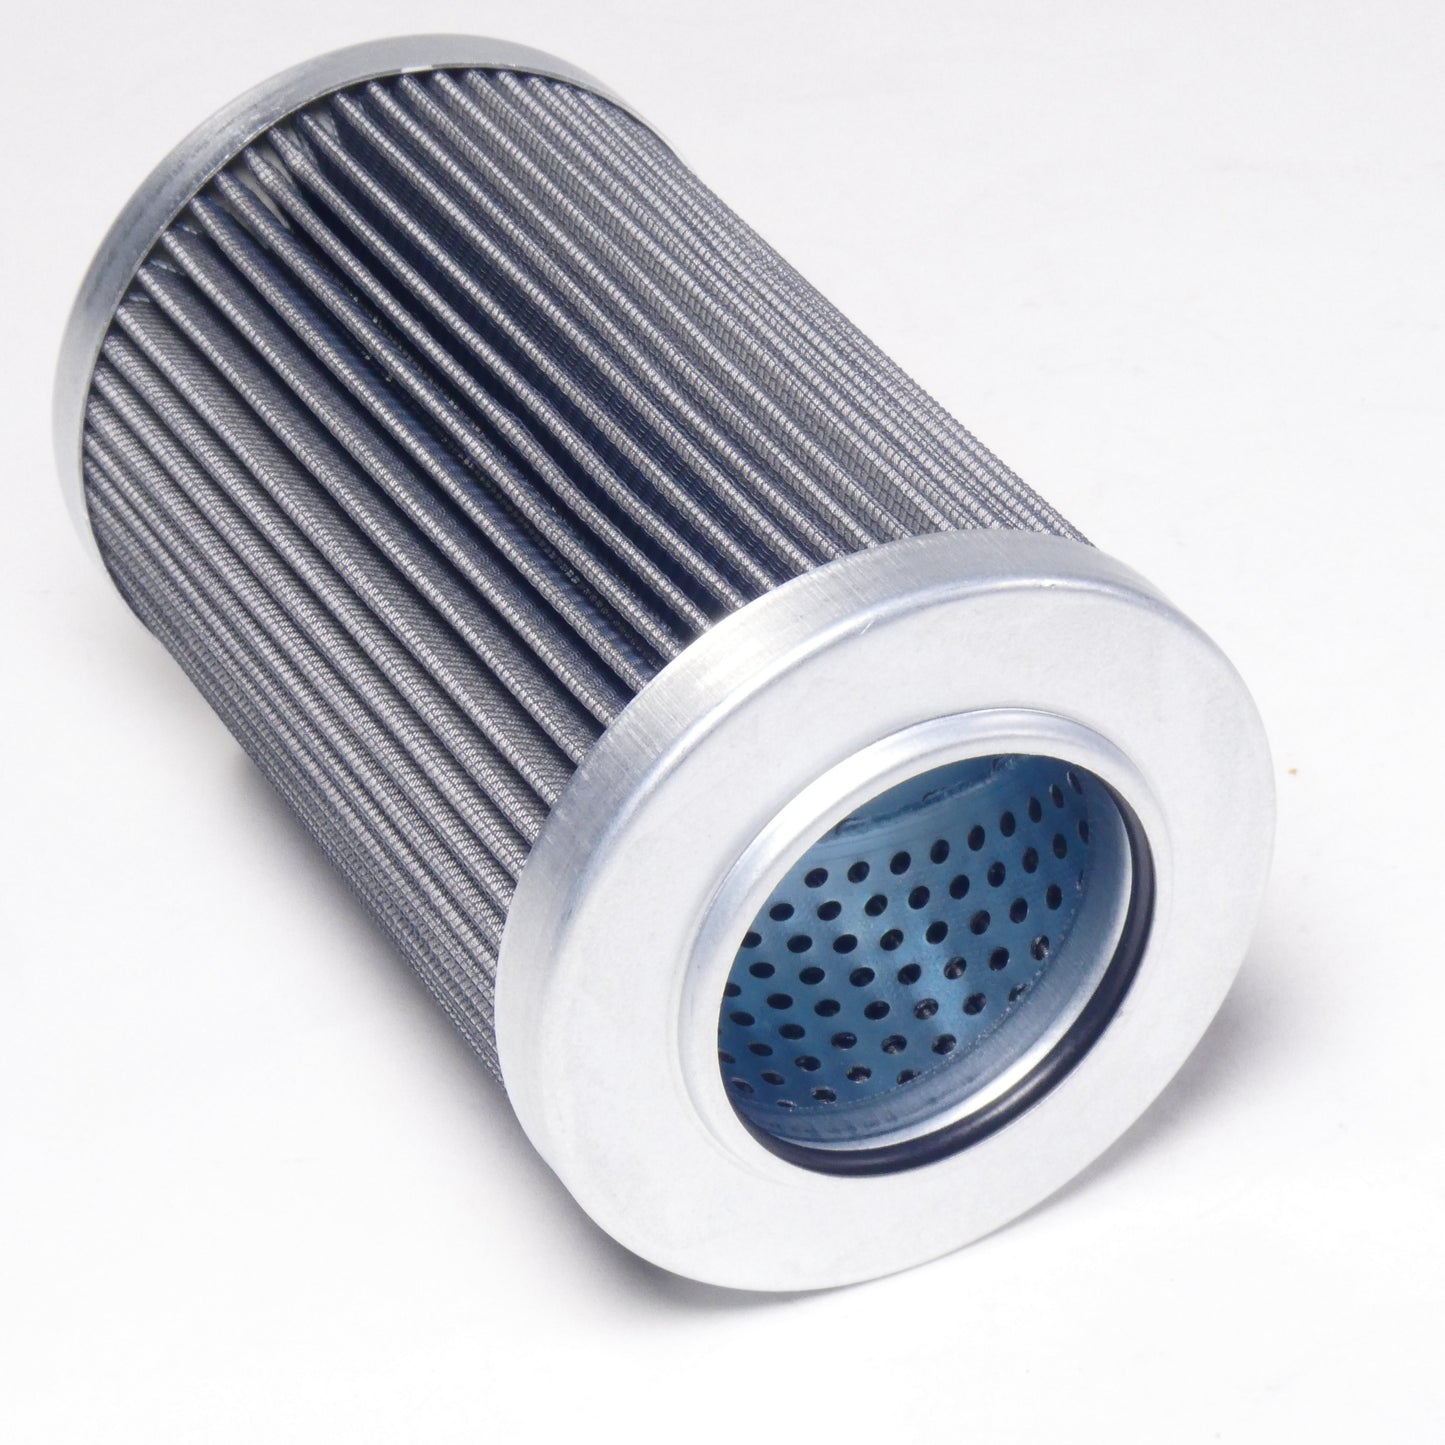 Hydrafil Replacement Filter Element for EPE 1.0020G60-A00-0-E